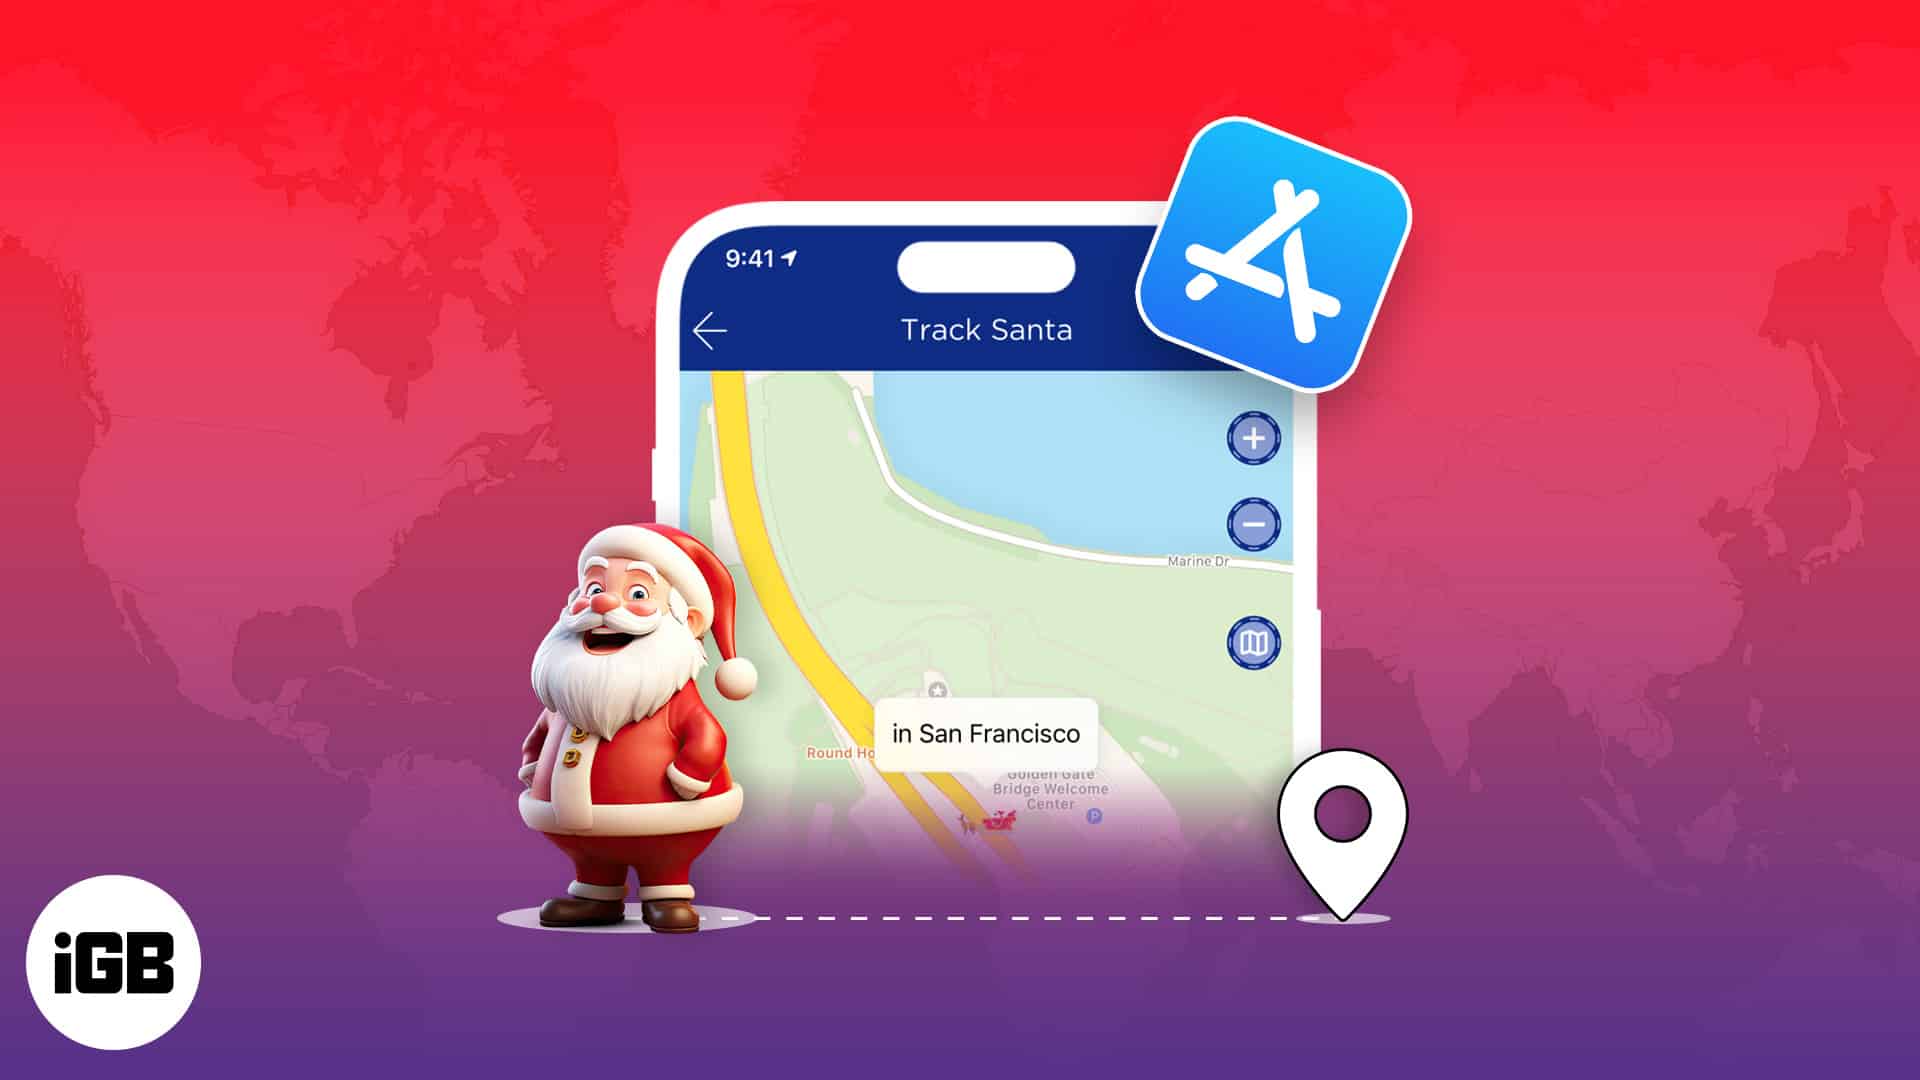 Best apps to track santa live on iphone and ipad